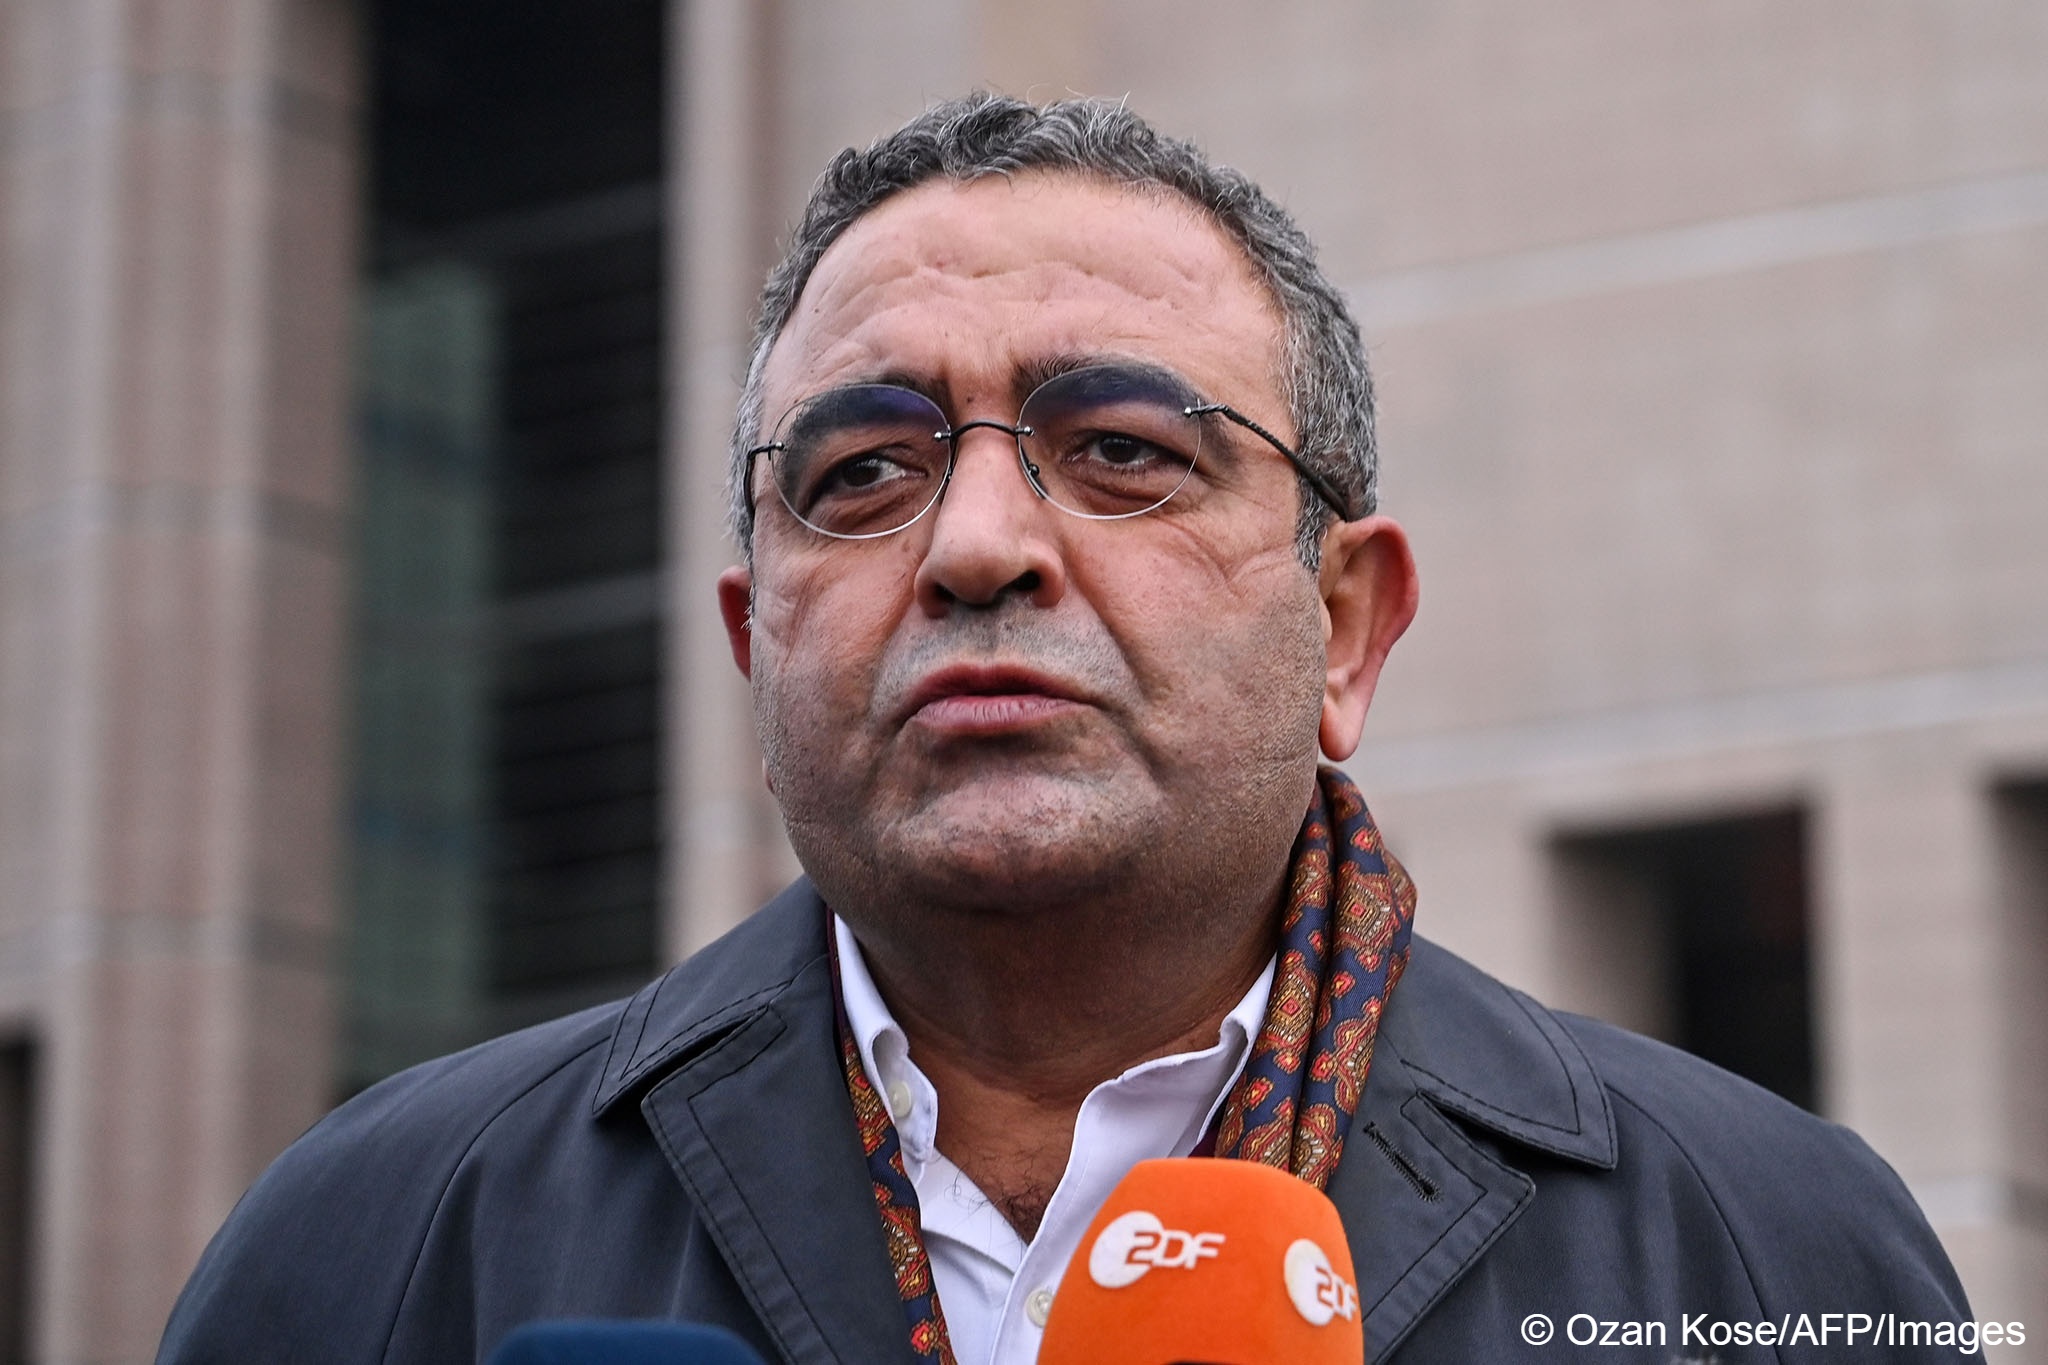 Sezgin Tanrikulu, human rights lawyer and MP for the Republican People's Party (CHP) (photo: Ozan Kose/AFP) 